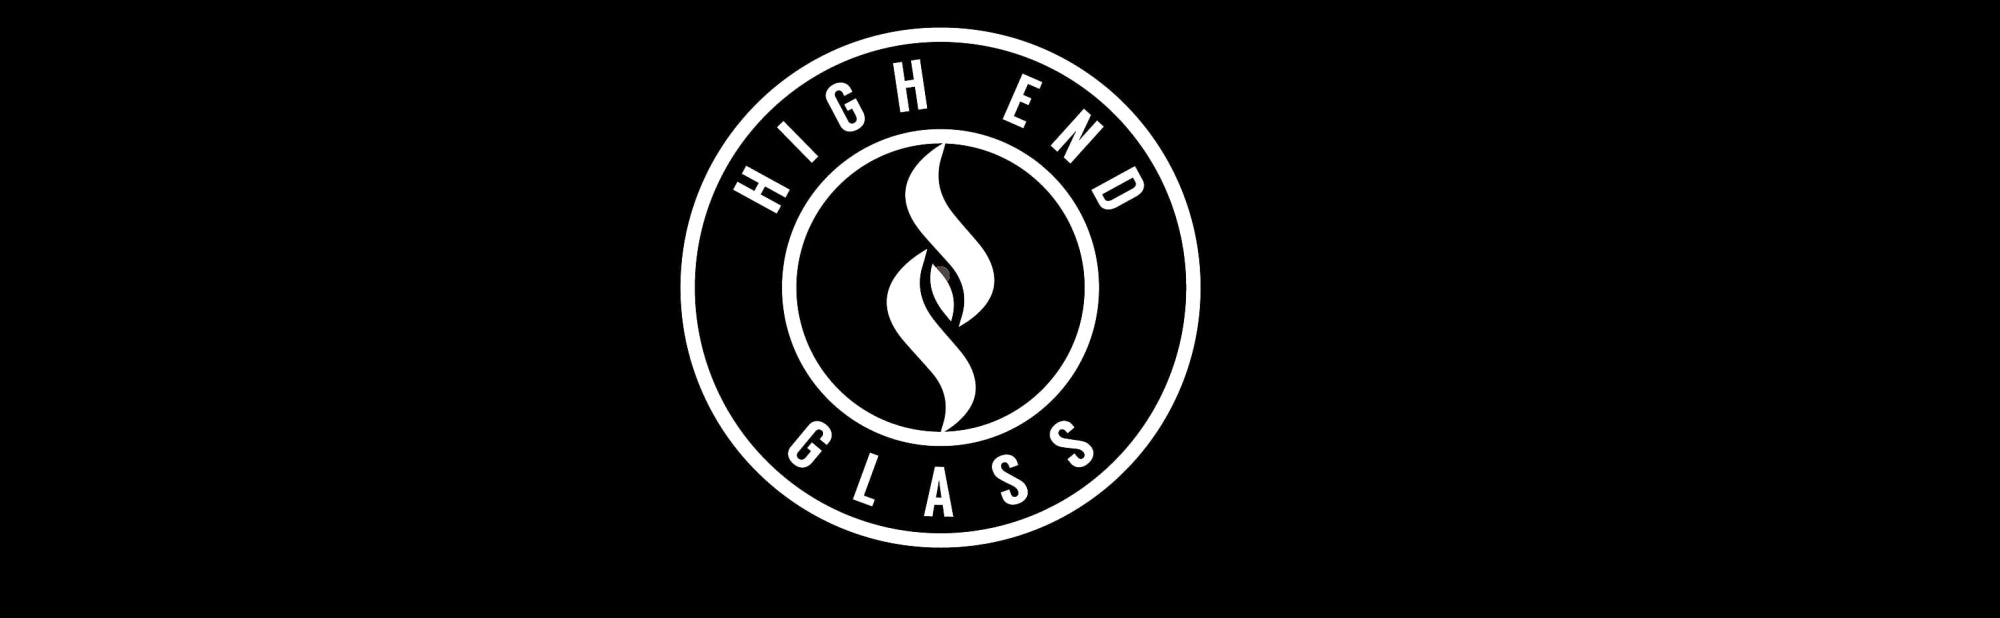 image of high end glass & tobacco in sioux falls